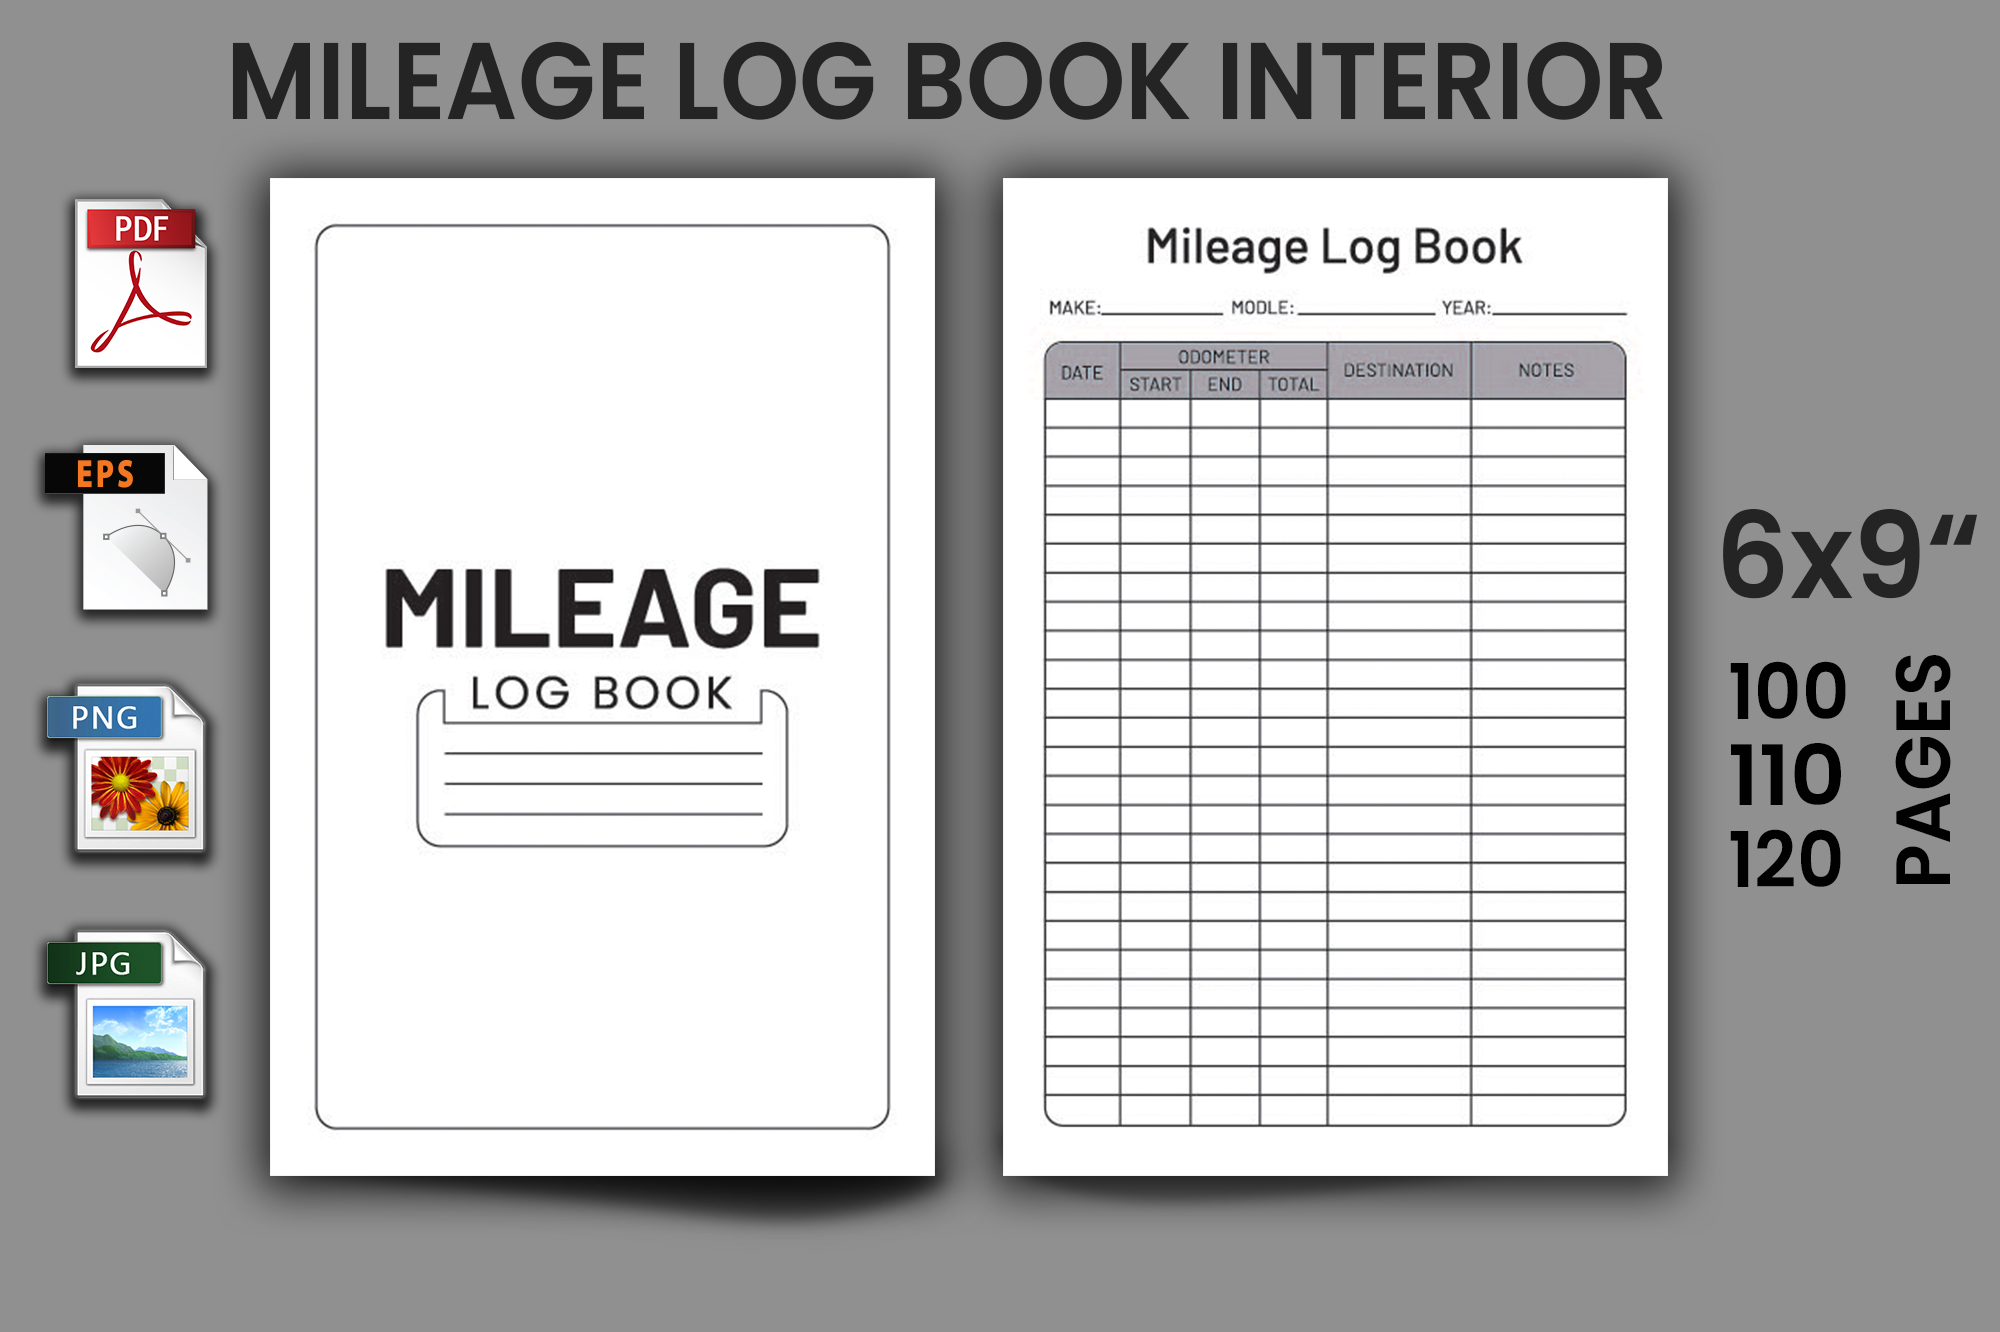 Mileage log book is shown with a picture of the mileage log book.